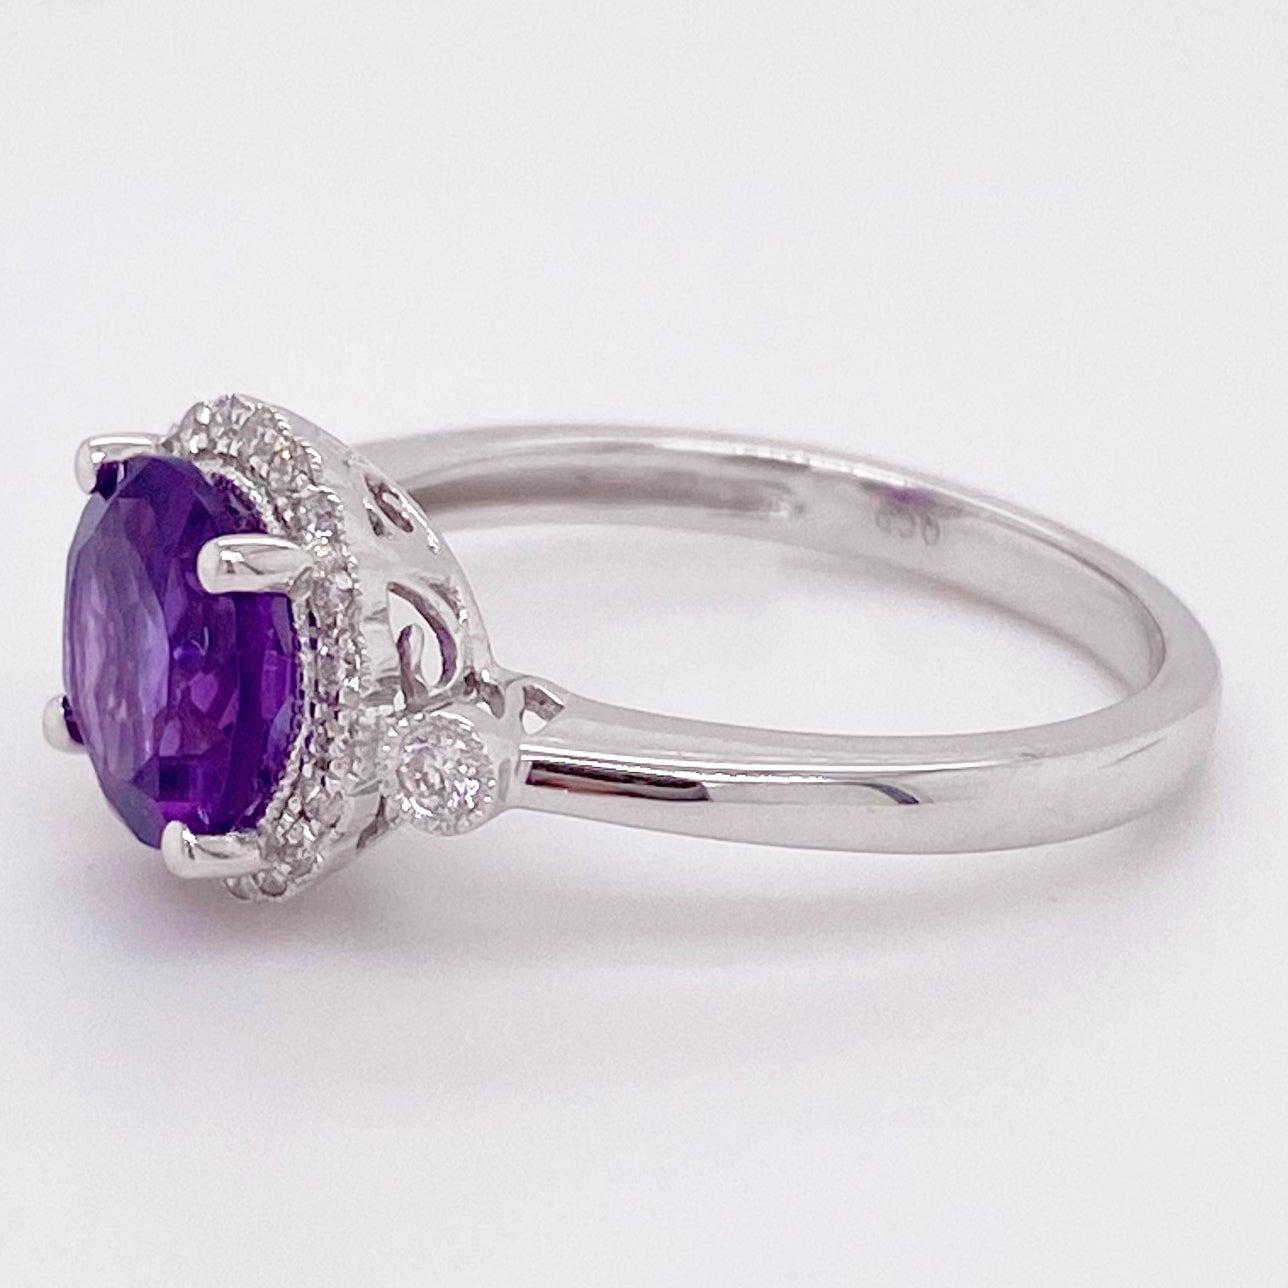 For Sale:  Amethyst Diamond Ring, Halo, Round, Engagement Ring Purple, 2.00 Carat Total Wt 4